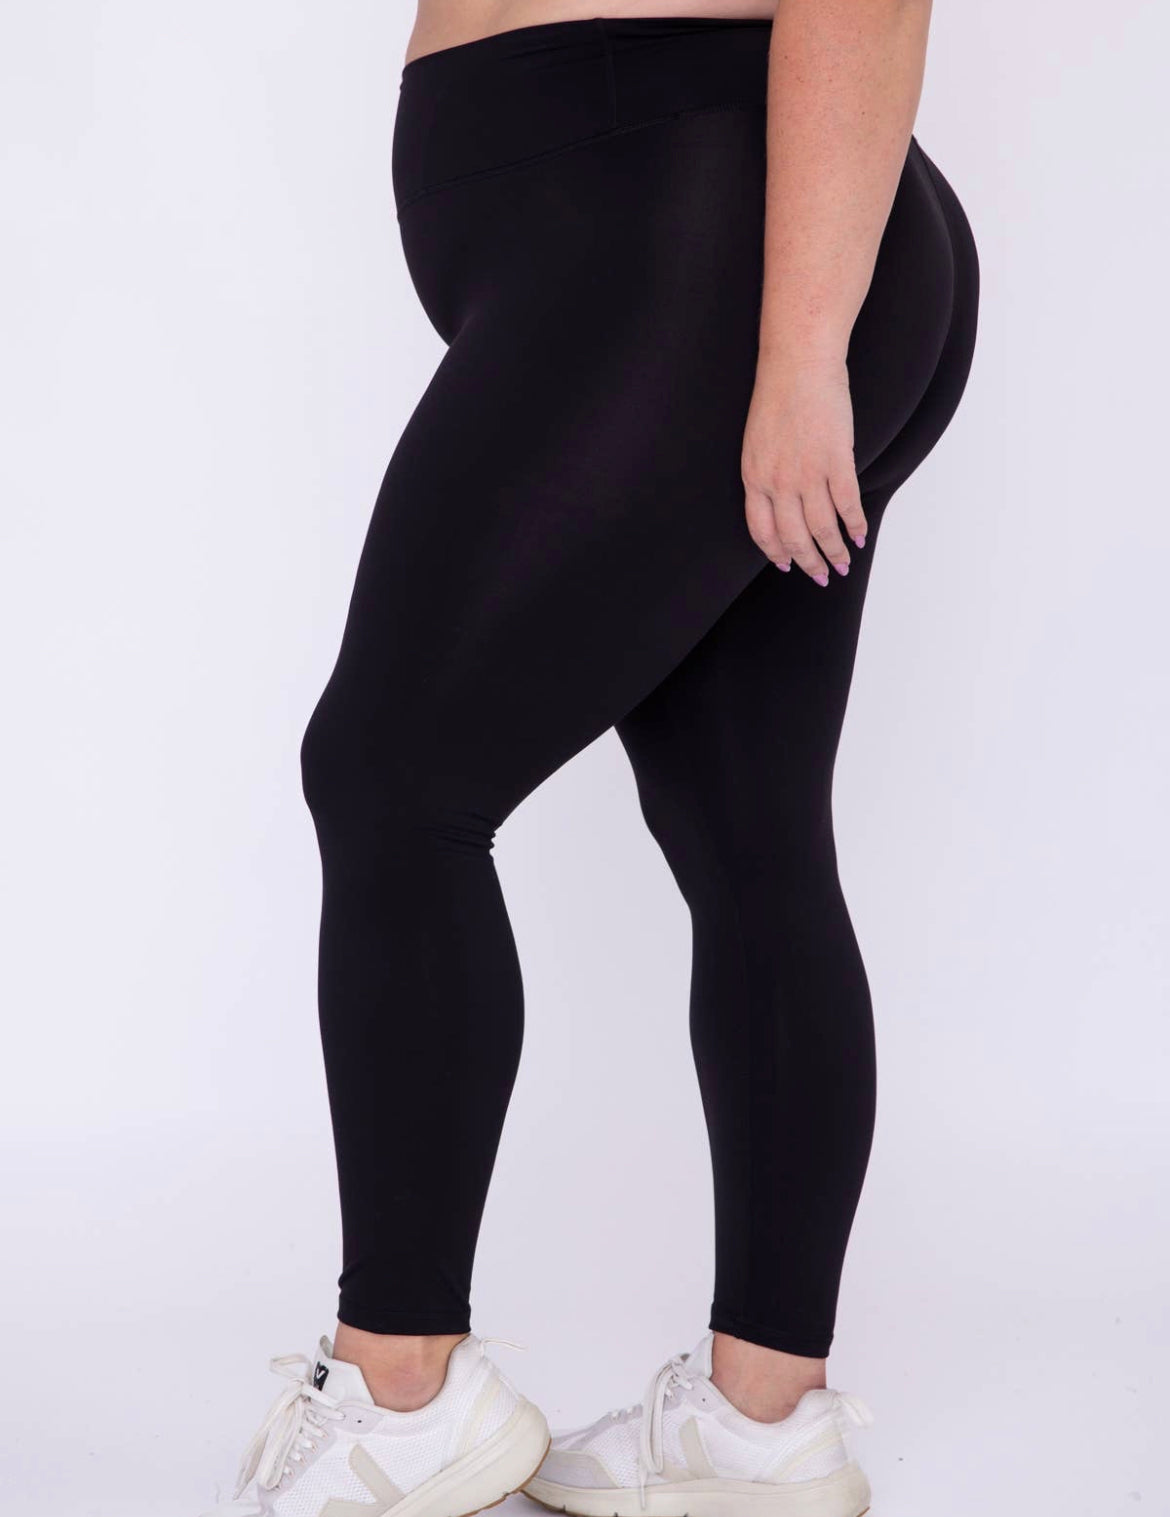 BT-B {On The Right Side} VOCAL Black Leggings w/Studs PLUS SIZE 1X